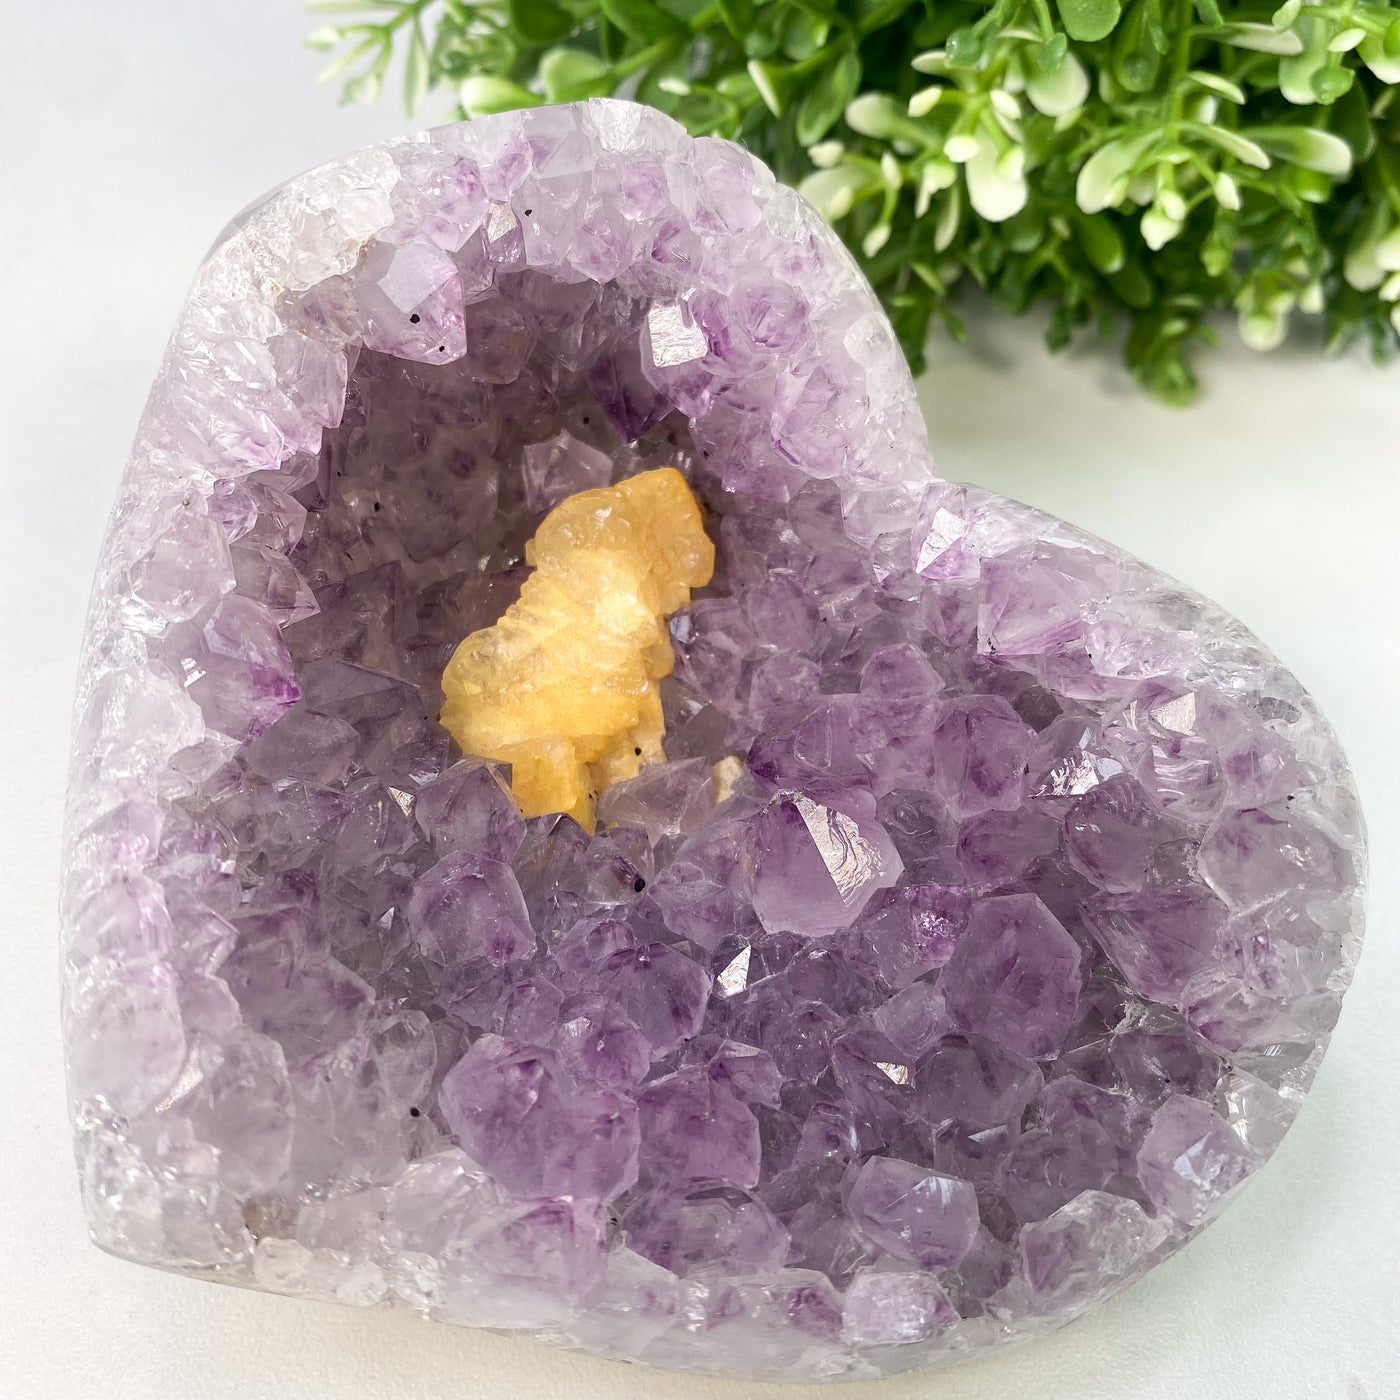 3D Amethyst heart with Calcite inclusion